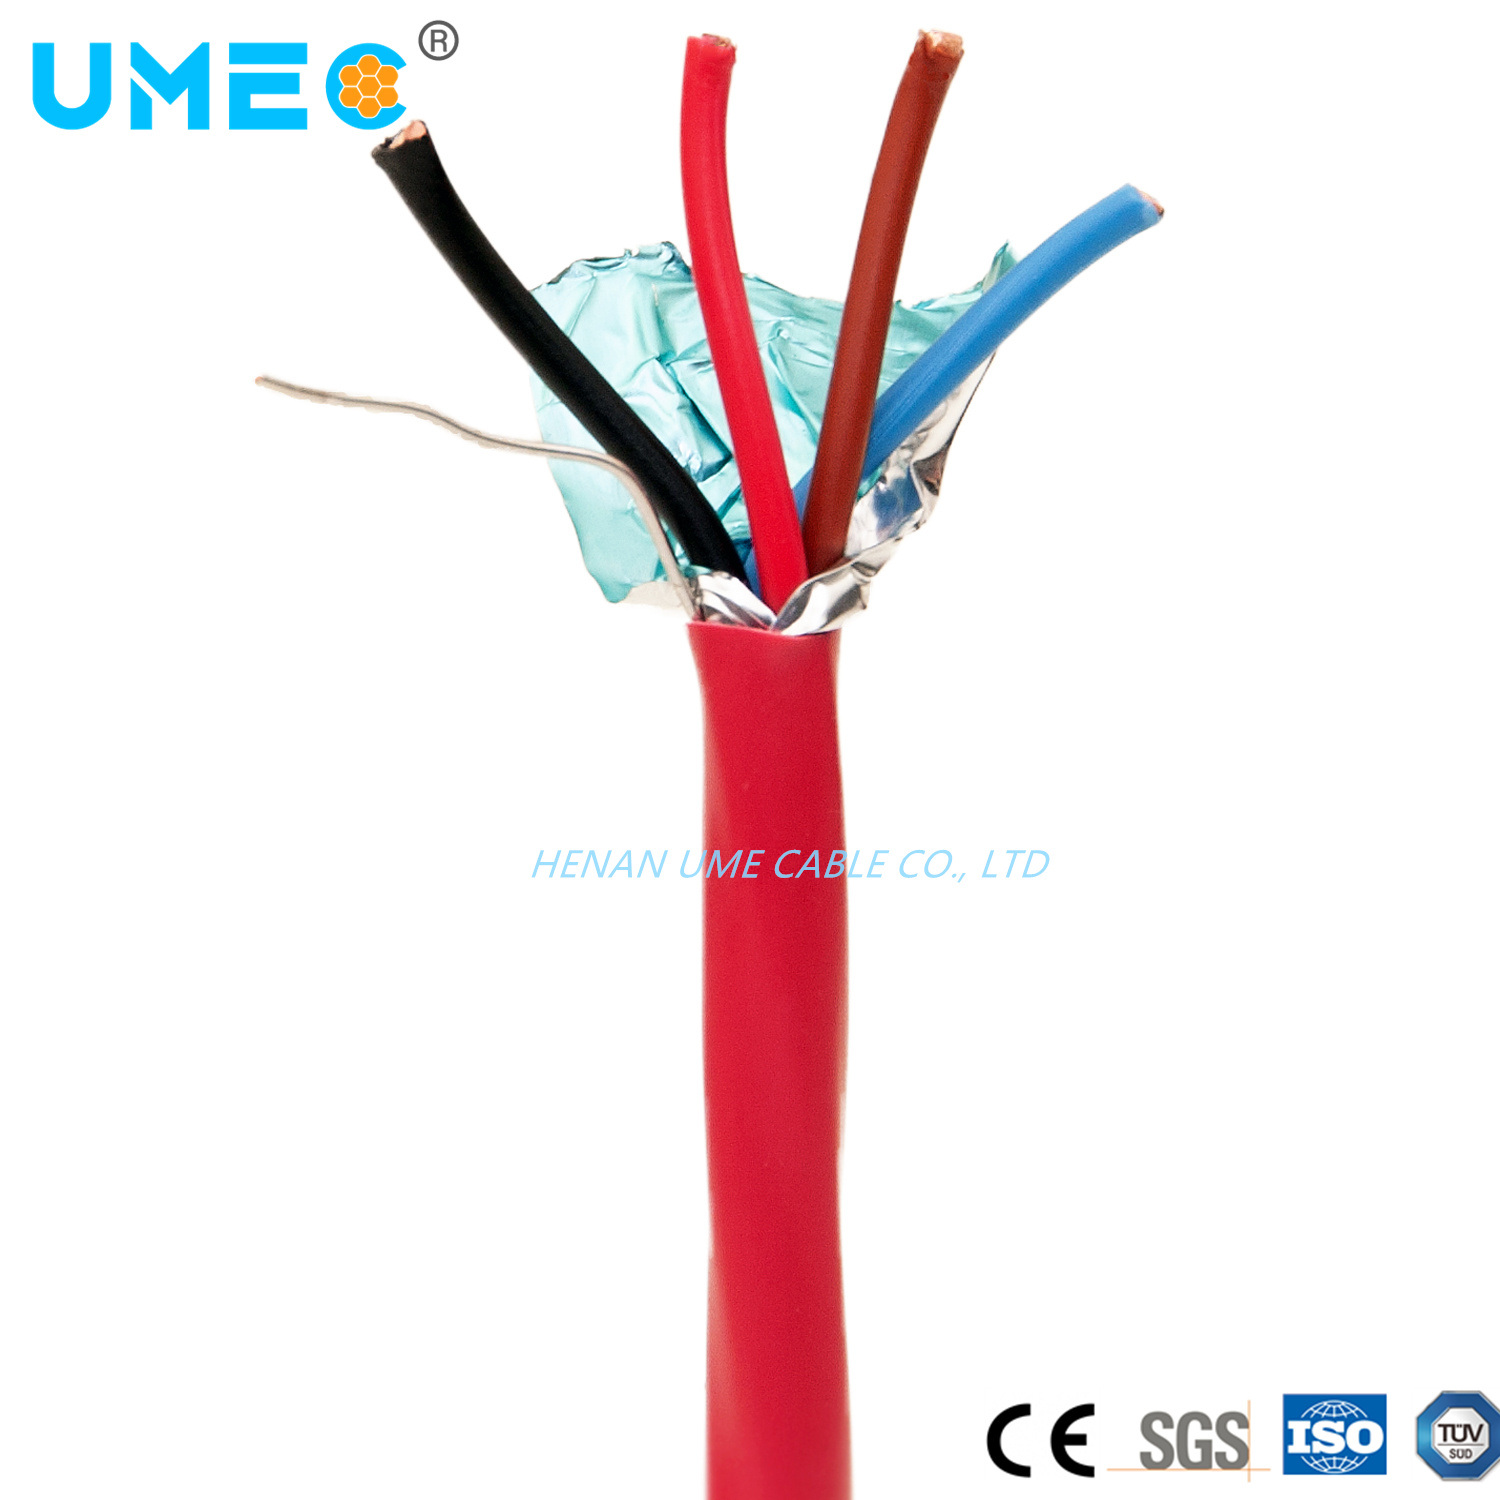 Fire Alarm Cable 12 / 14 / 16 / 18 / 22 AWG Solid Shielded Unshielded 2c / 4c Fplr Security Fire Alarm Cable